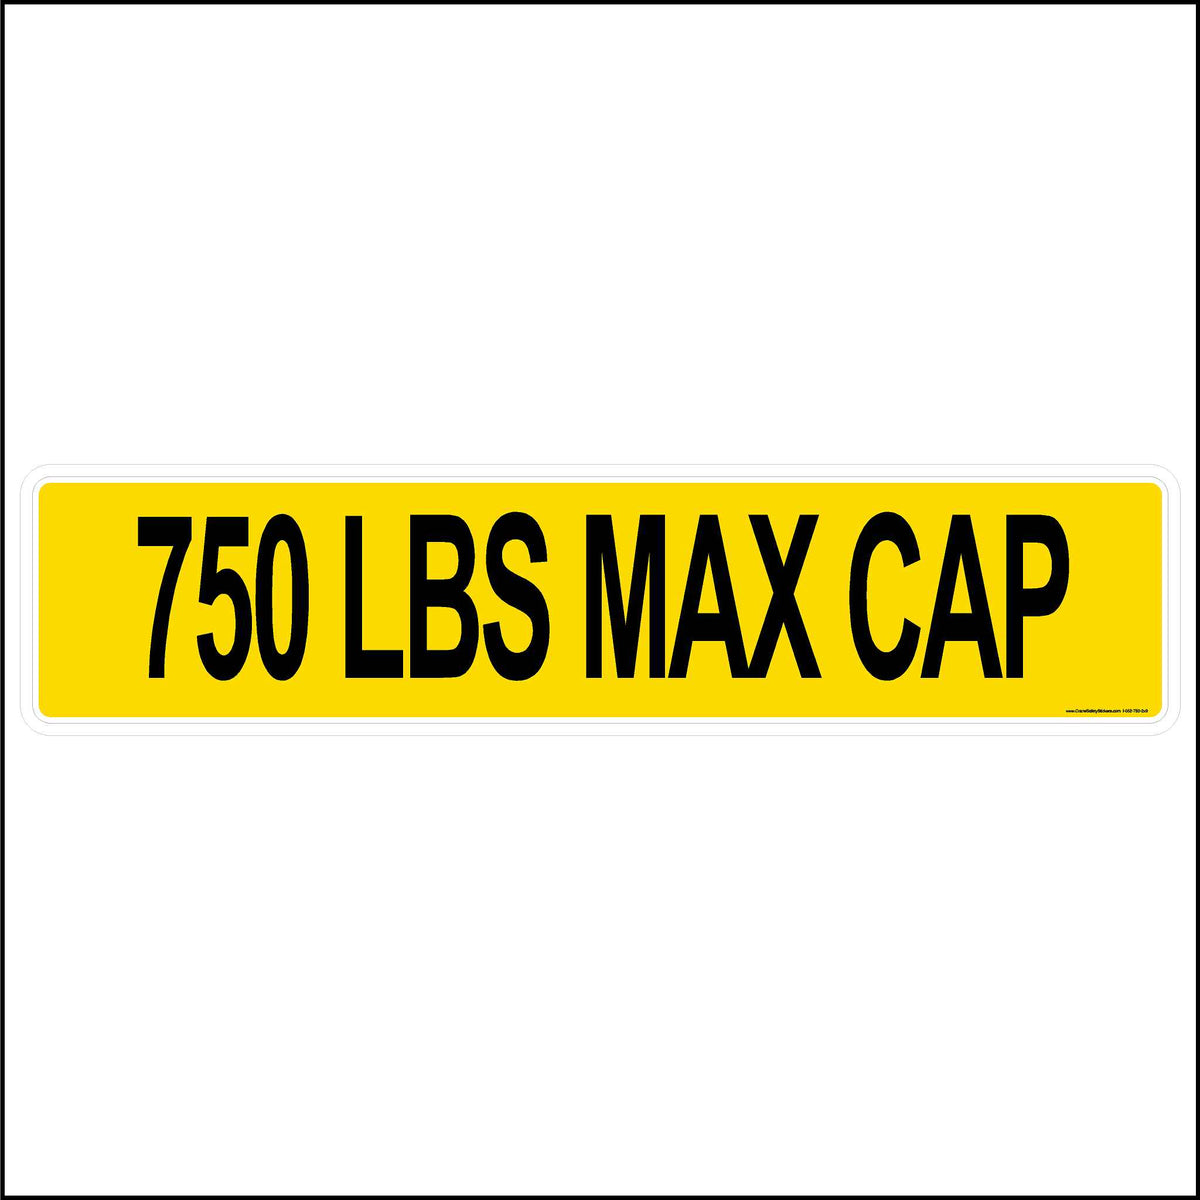 yellow background with black text - 750 lbs max cap.